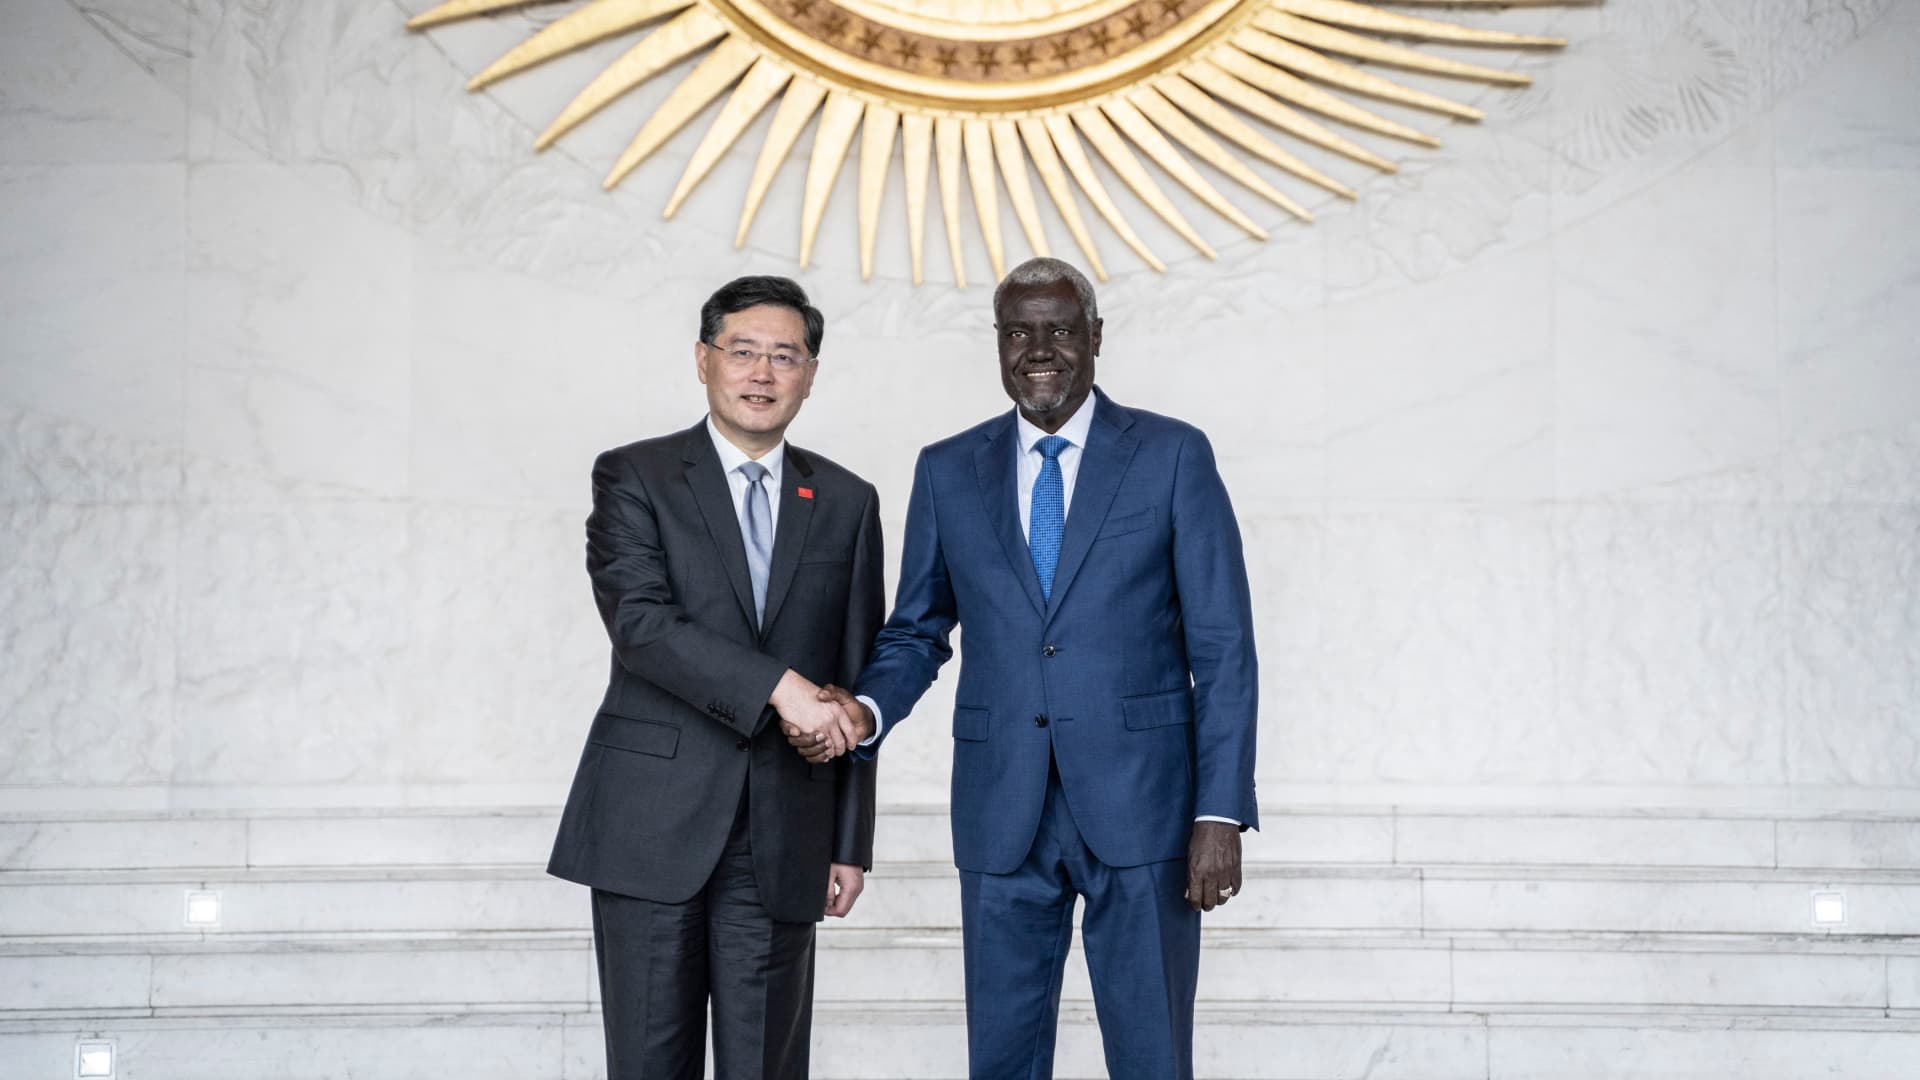 ADDIS ABABA, Ethiopia - Jan. 11, 2023: China's Foreign Minister Qin Gang (L) and Moussa Faki (R), Chairperson of the African Union (AU) Commission, shake hands during their meeting at the Africa Union headquarters.